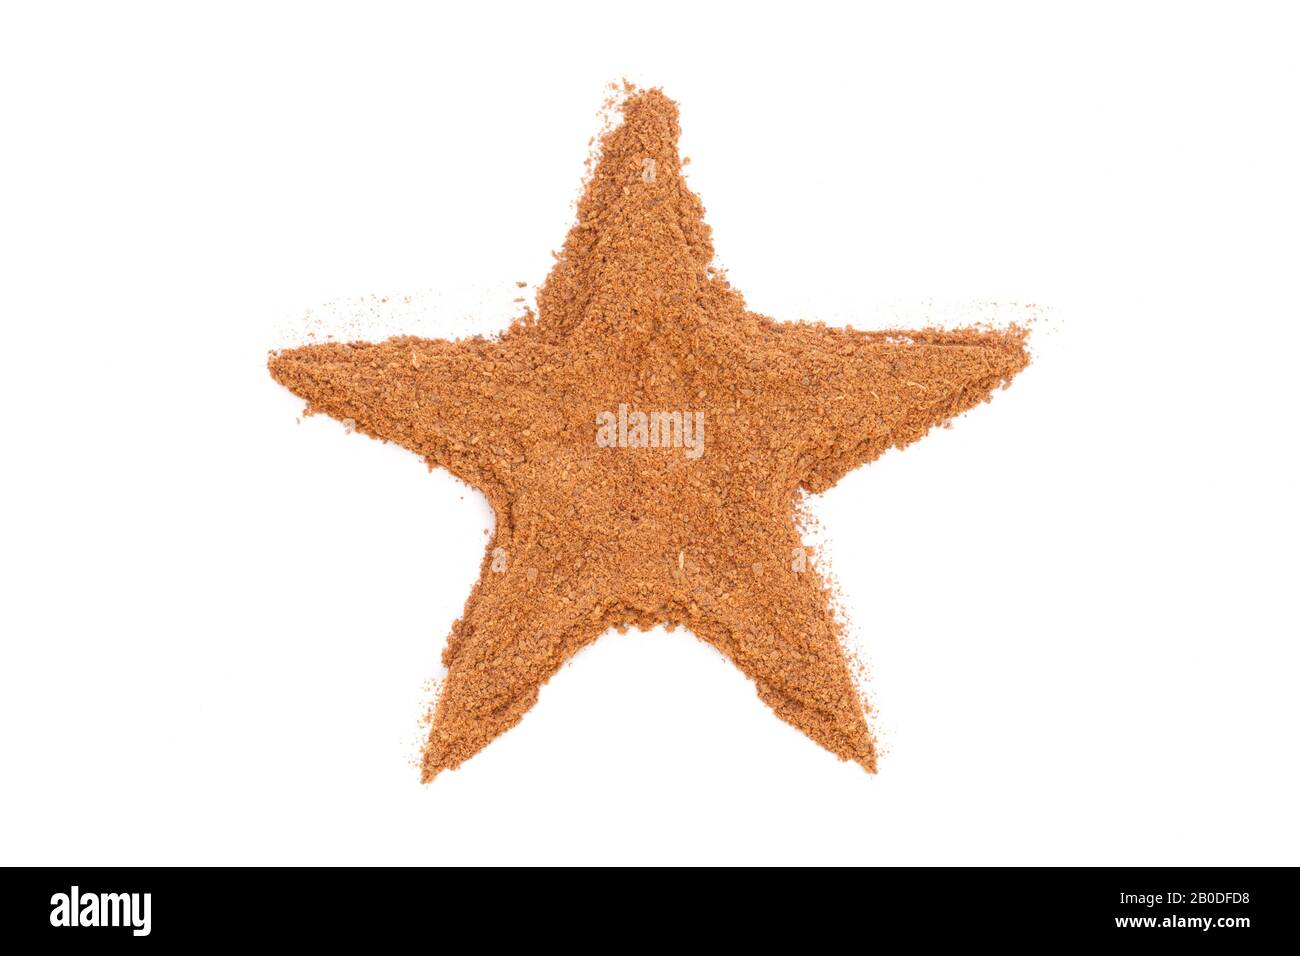 Heap of ground Cinnamon isolated in star shape on white background.  As a spice or condiment cinnamon sold in the form of sticks or a hammer. Stock Photo